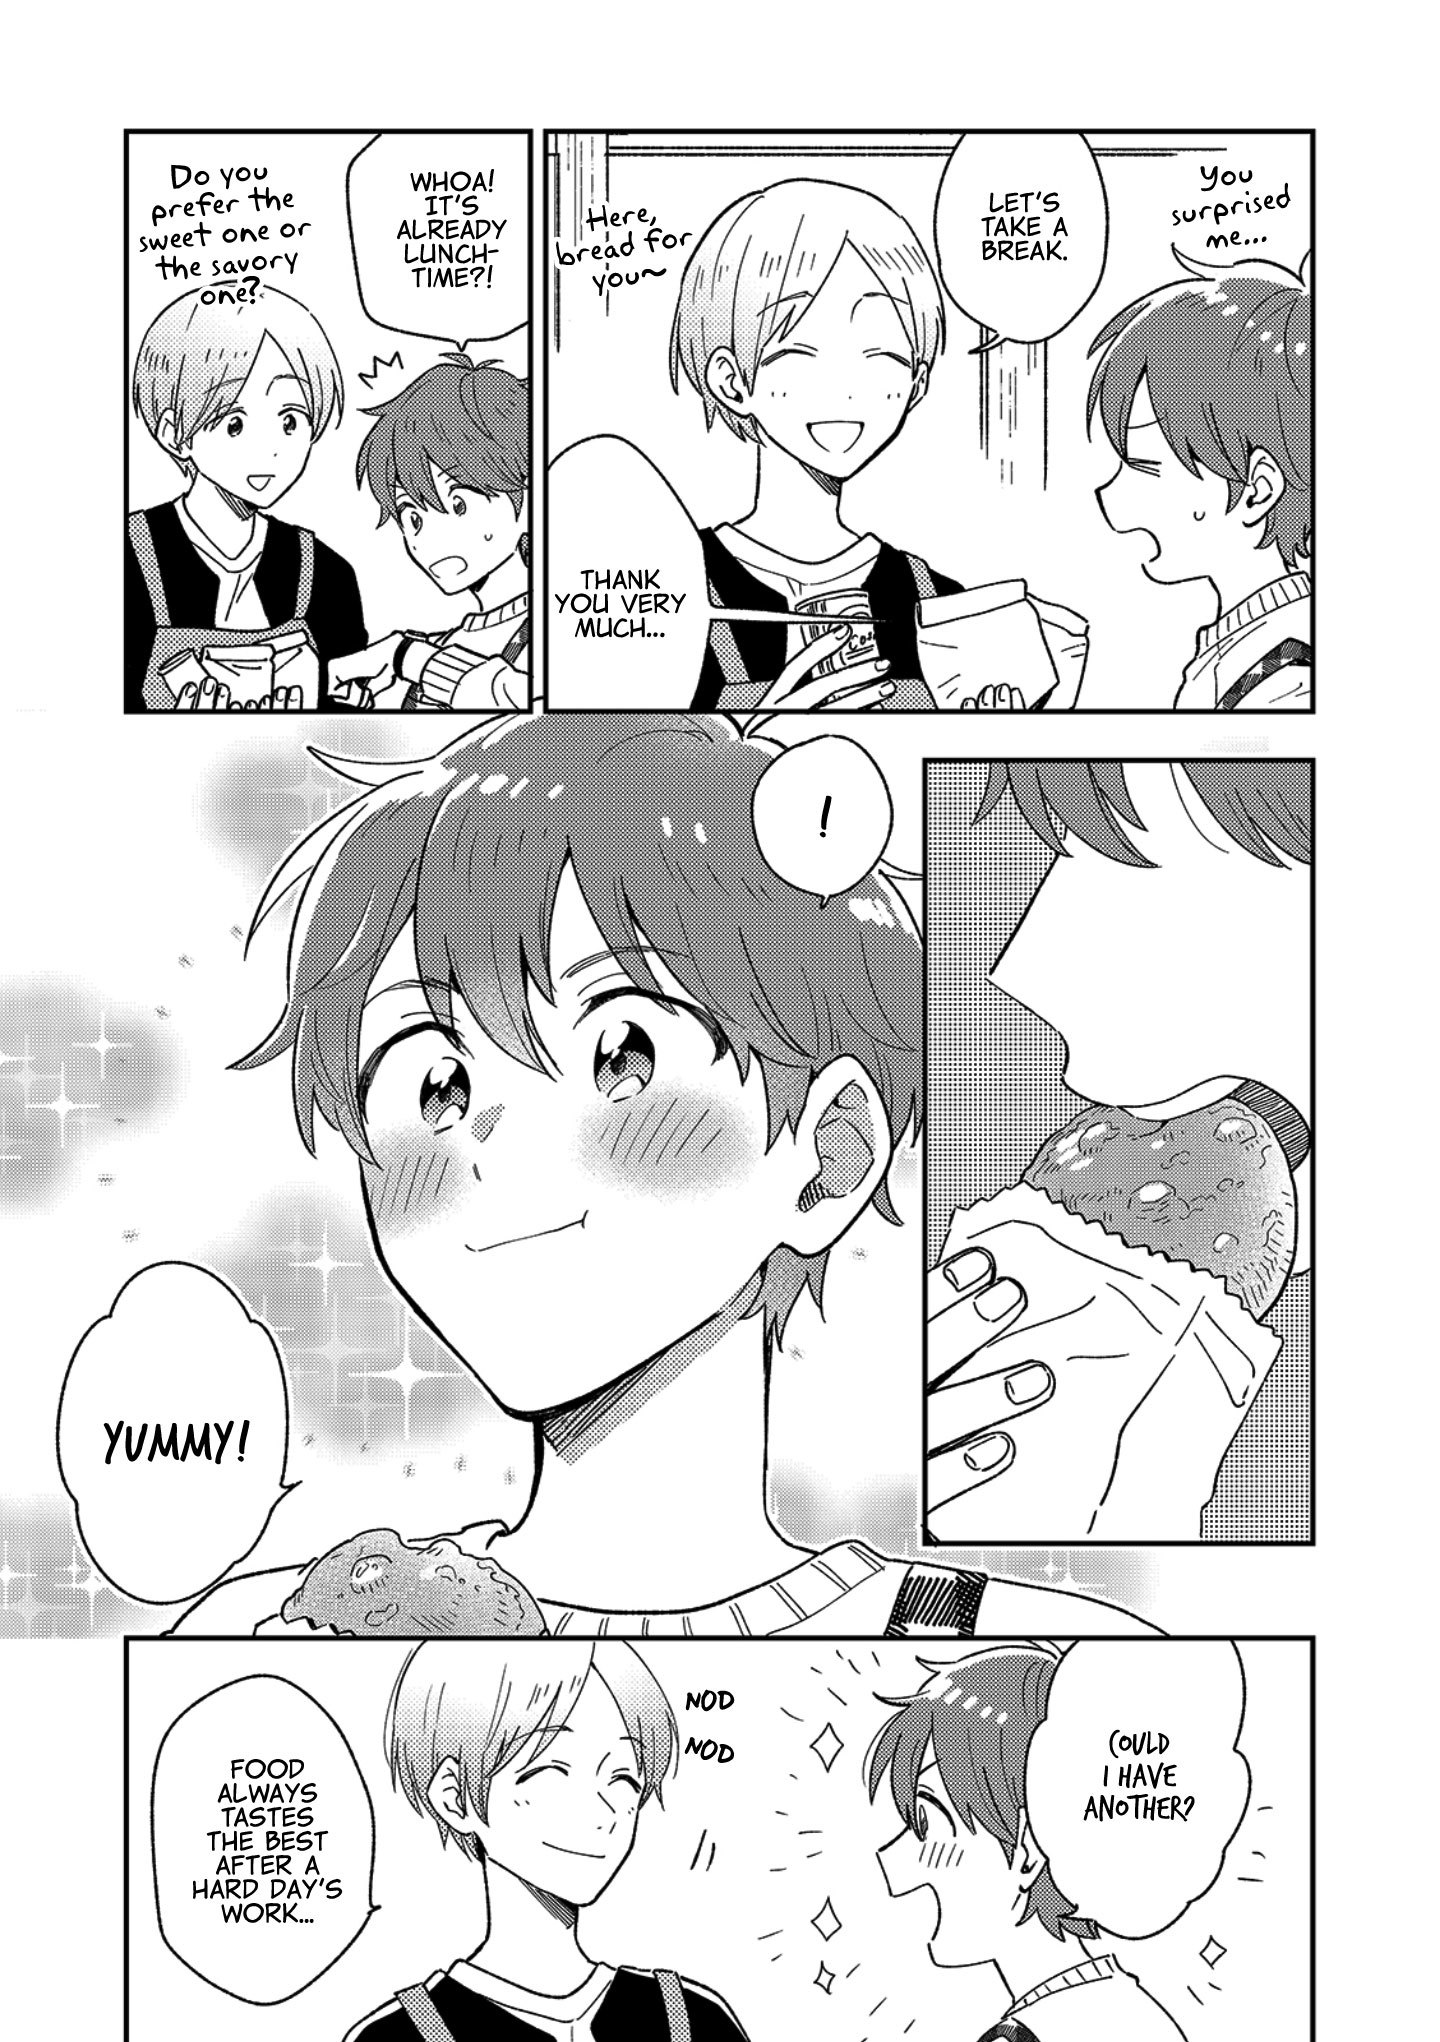 The Male High School Students Are Hungry Again Today vol.1 ch.11